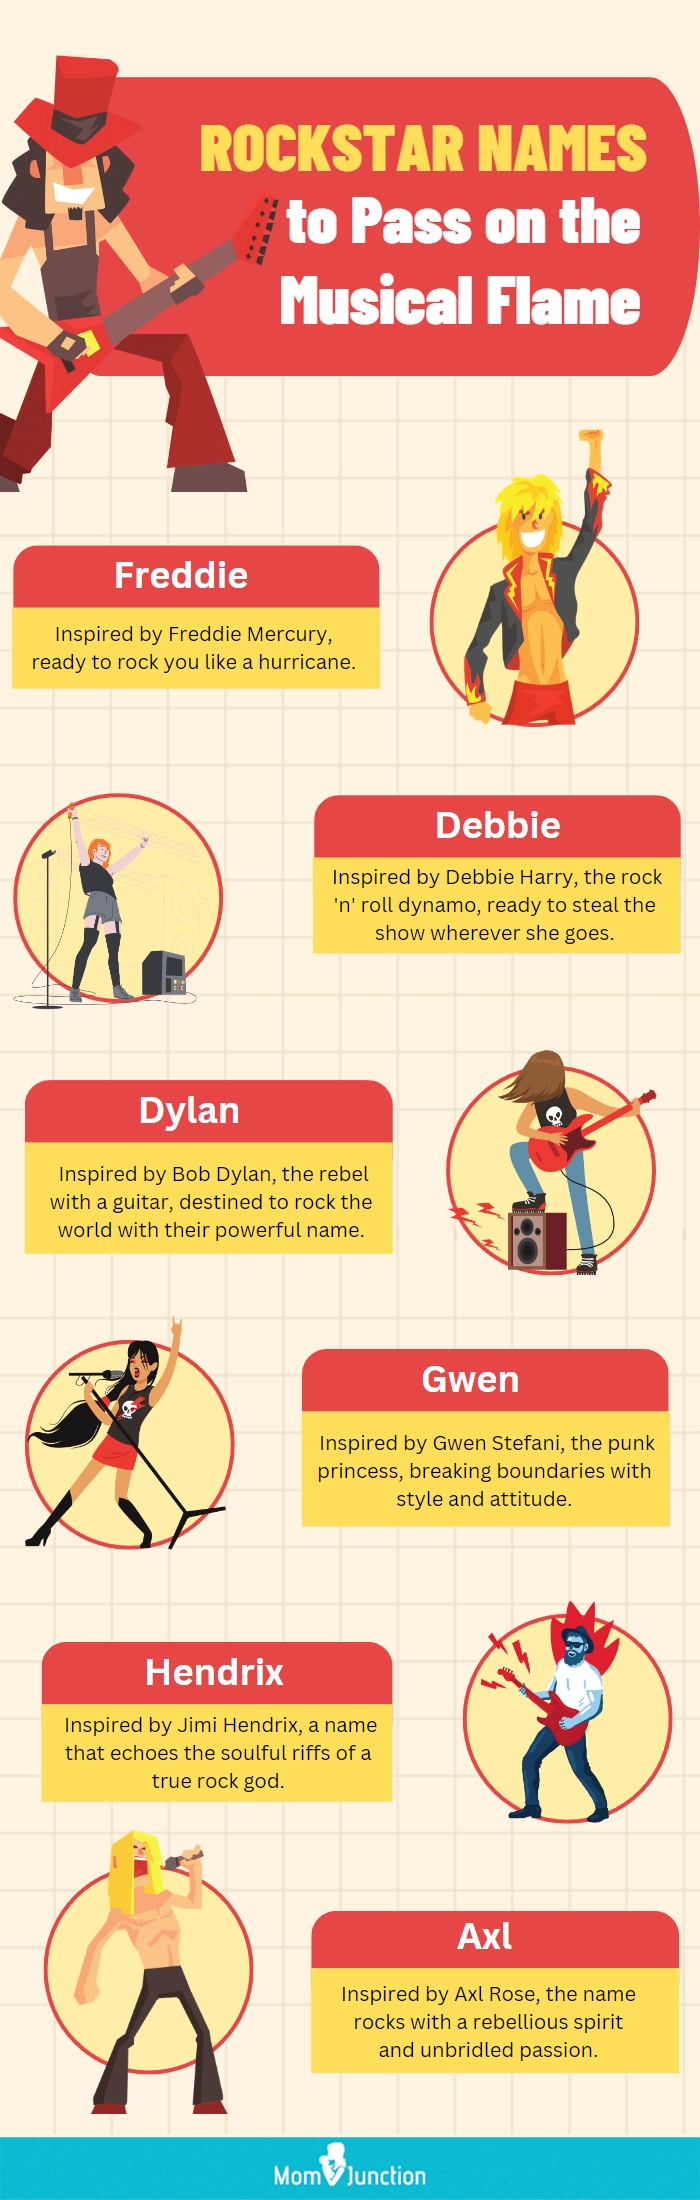 rockstar names to pass on the musical flame (infographic)